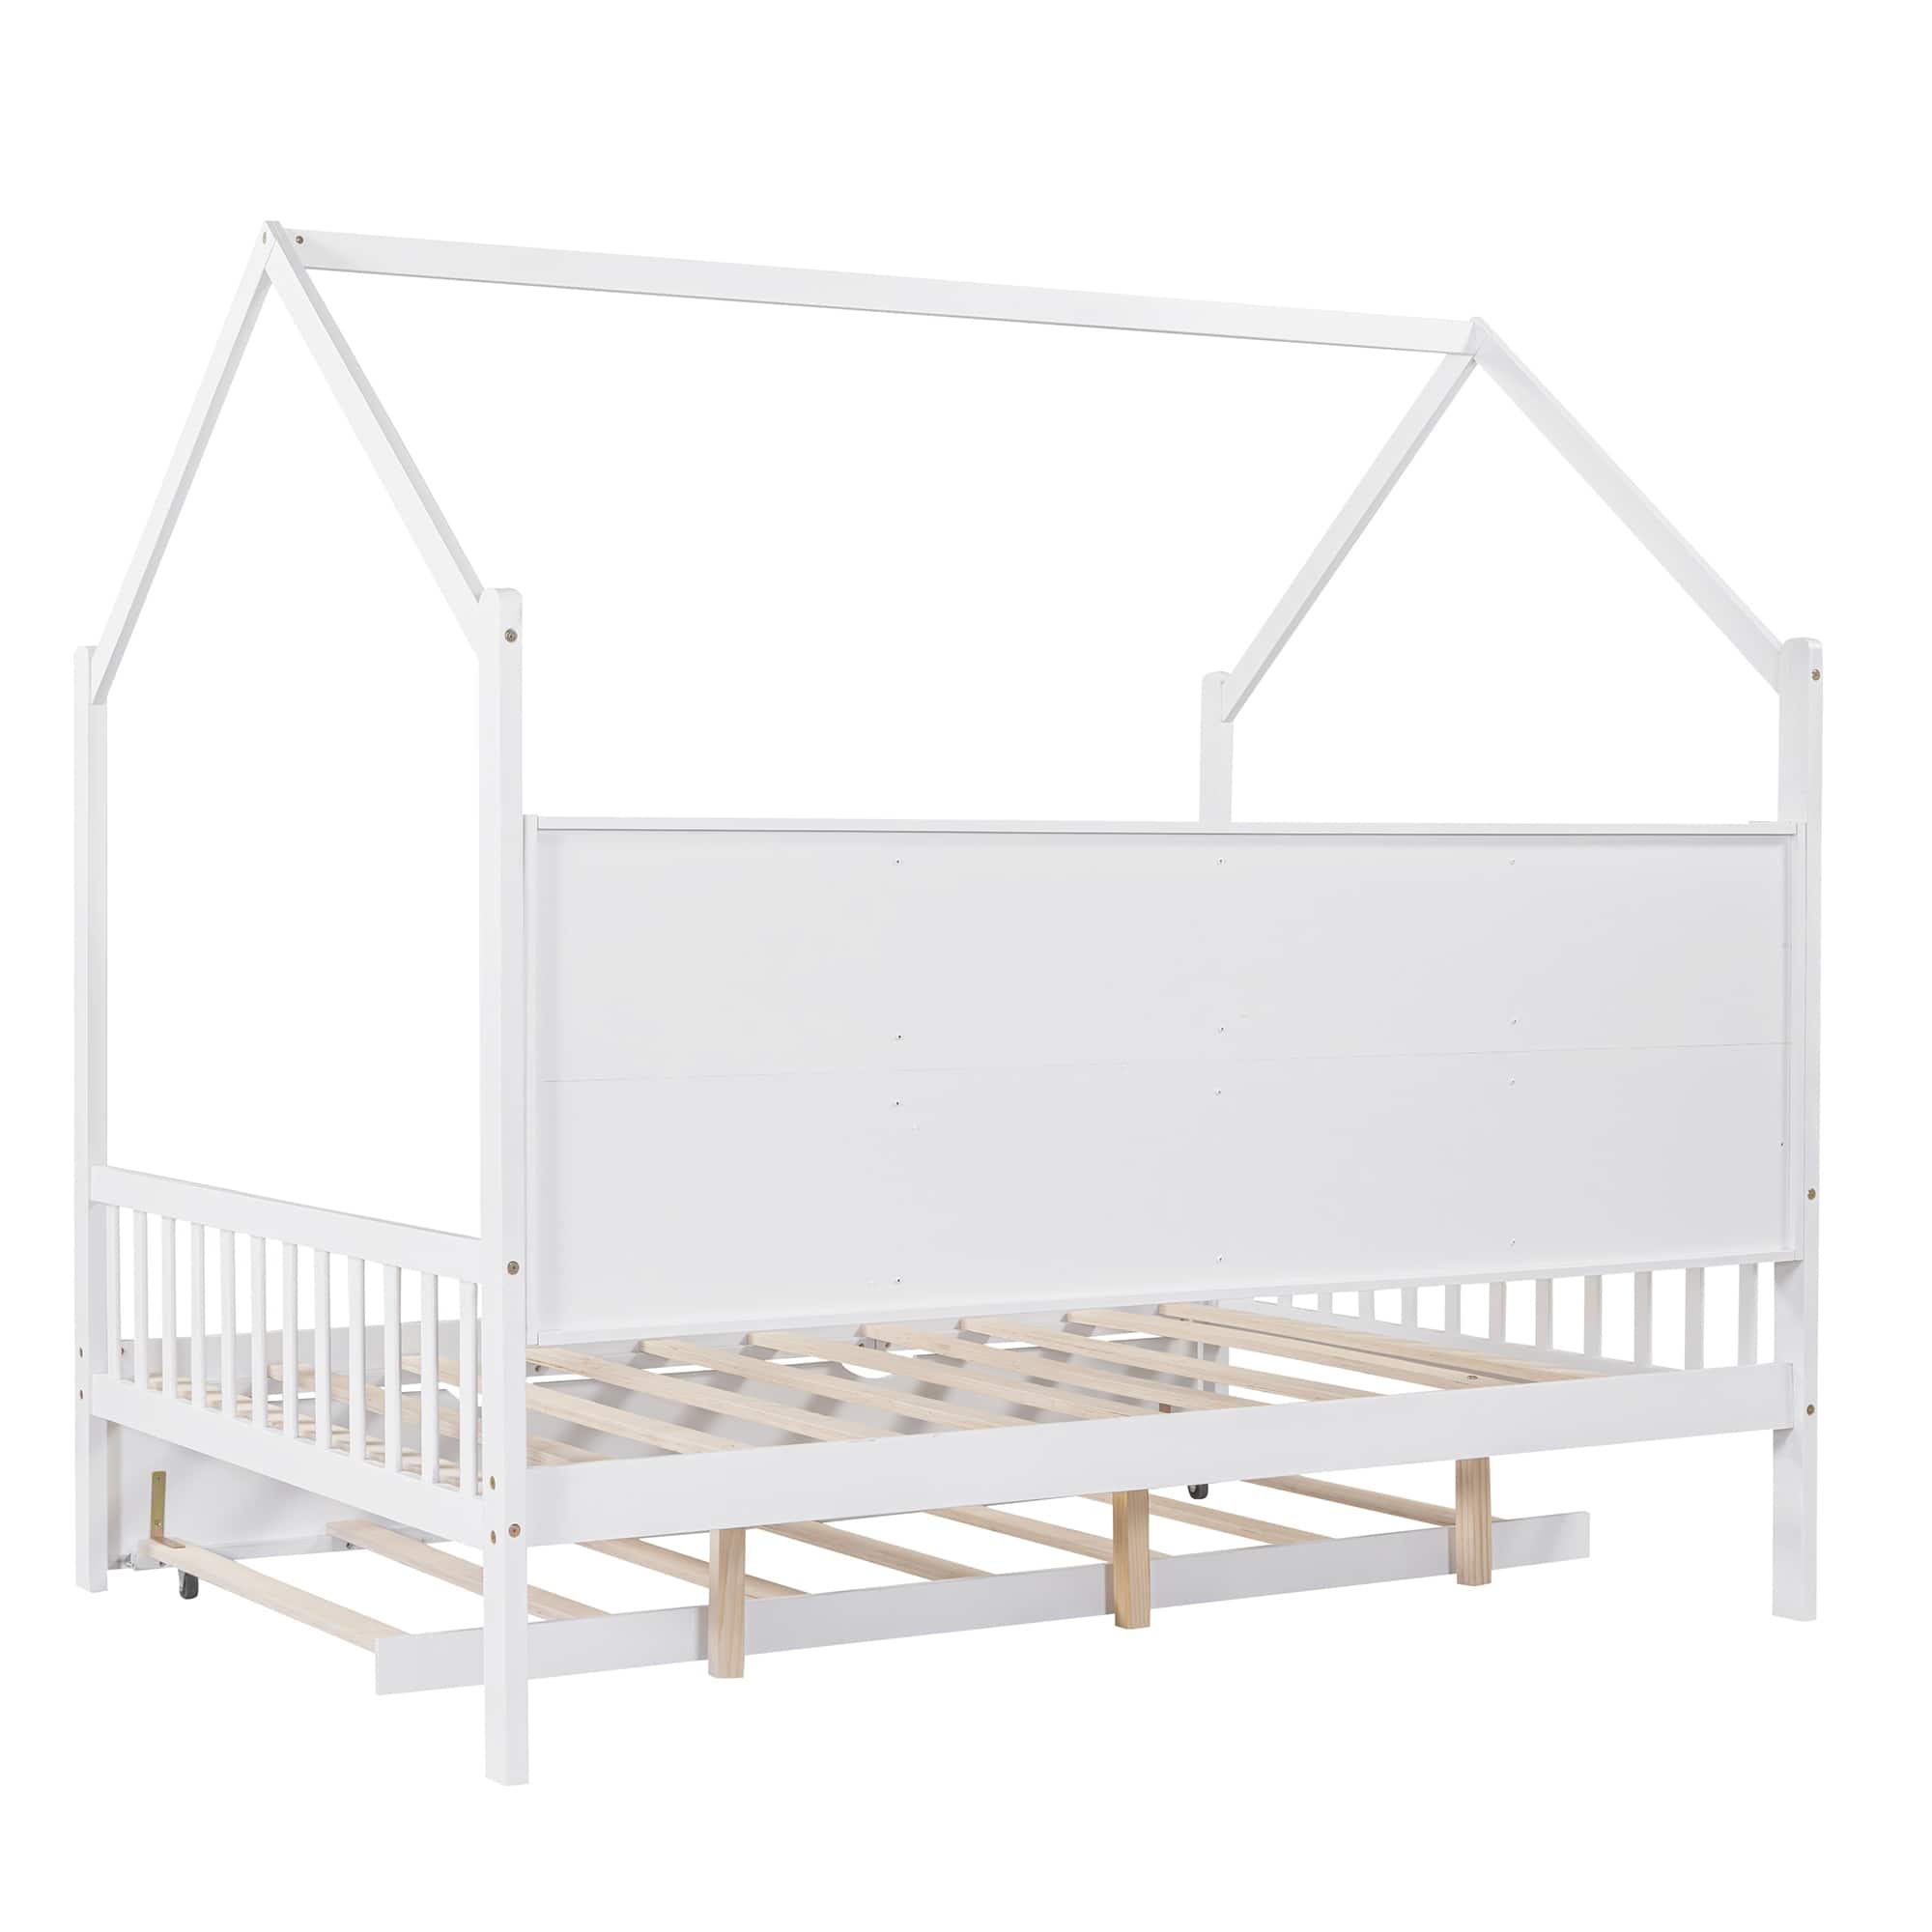 Wooden Full Size House Bed Pull-out Bed with Trundle, Kids Bed with ...